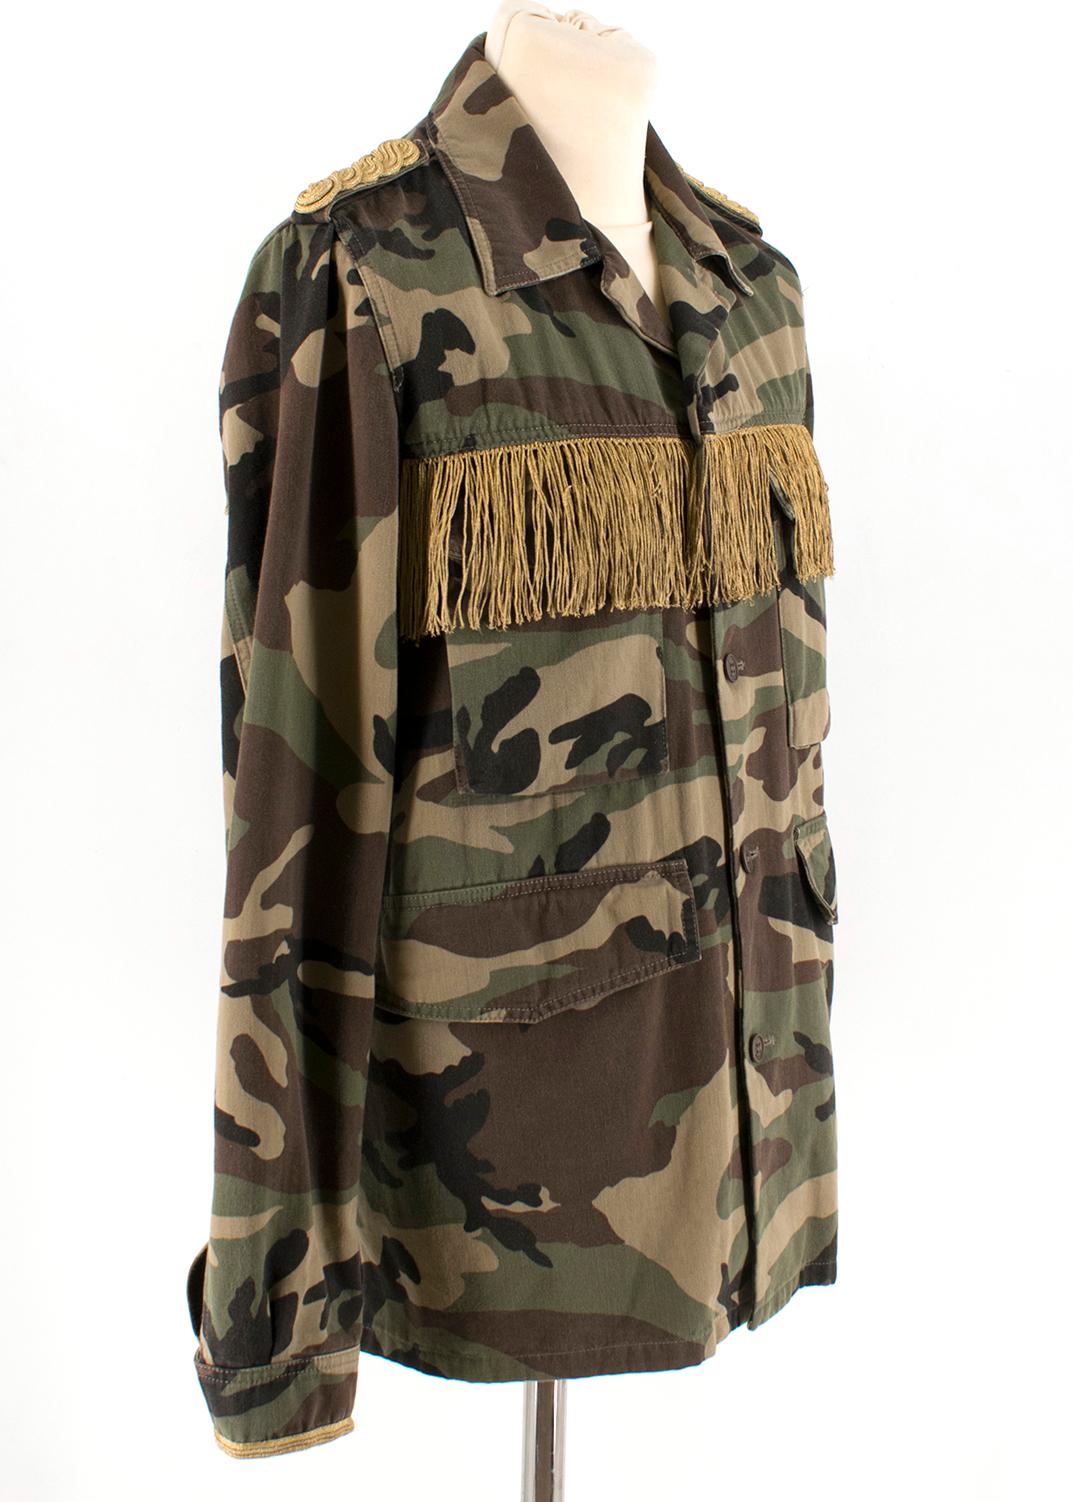 Saint Laurent Men's Green Fringed Camouflage-Print Jacket

Green camo print design 
Gold fringe detailing on chest of the jacket 
Gold epaulettes
Notch lapel collar 
Centre button closure 
Brown hardware
Two front flap pockets
Mid weight jacket
Gold